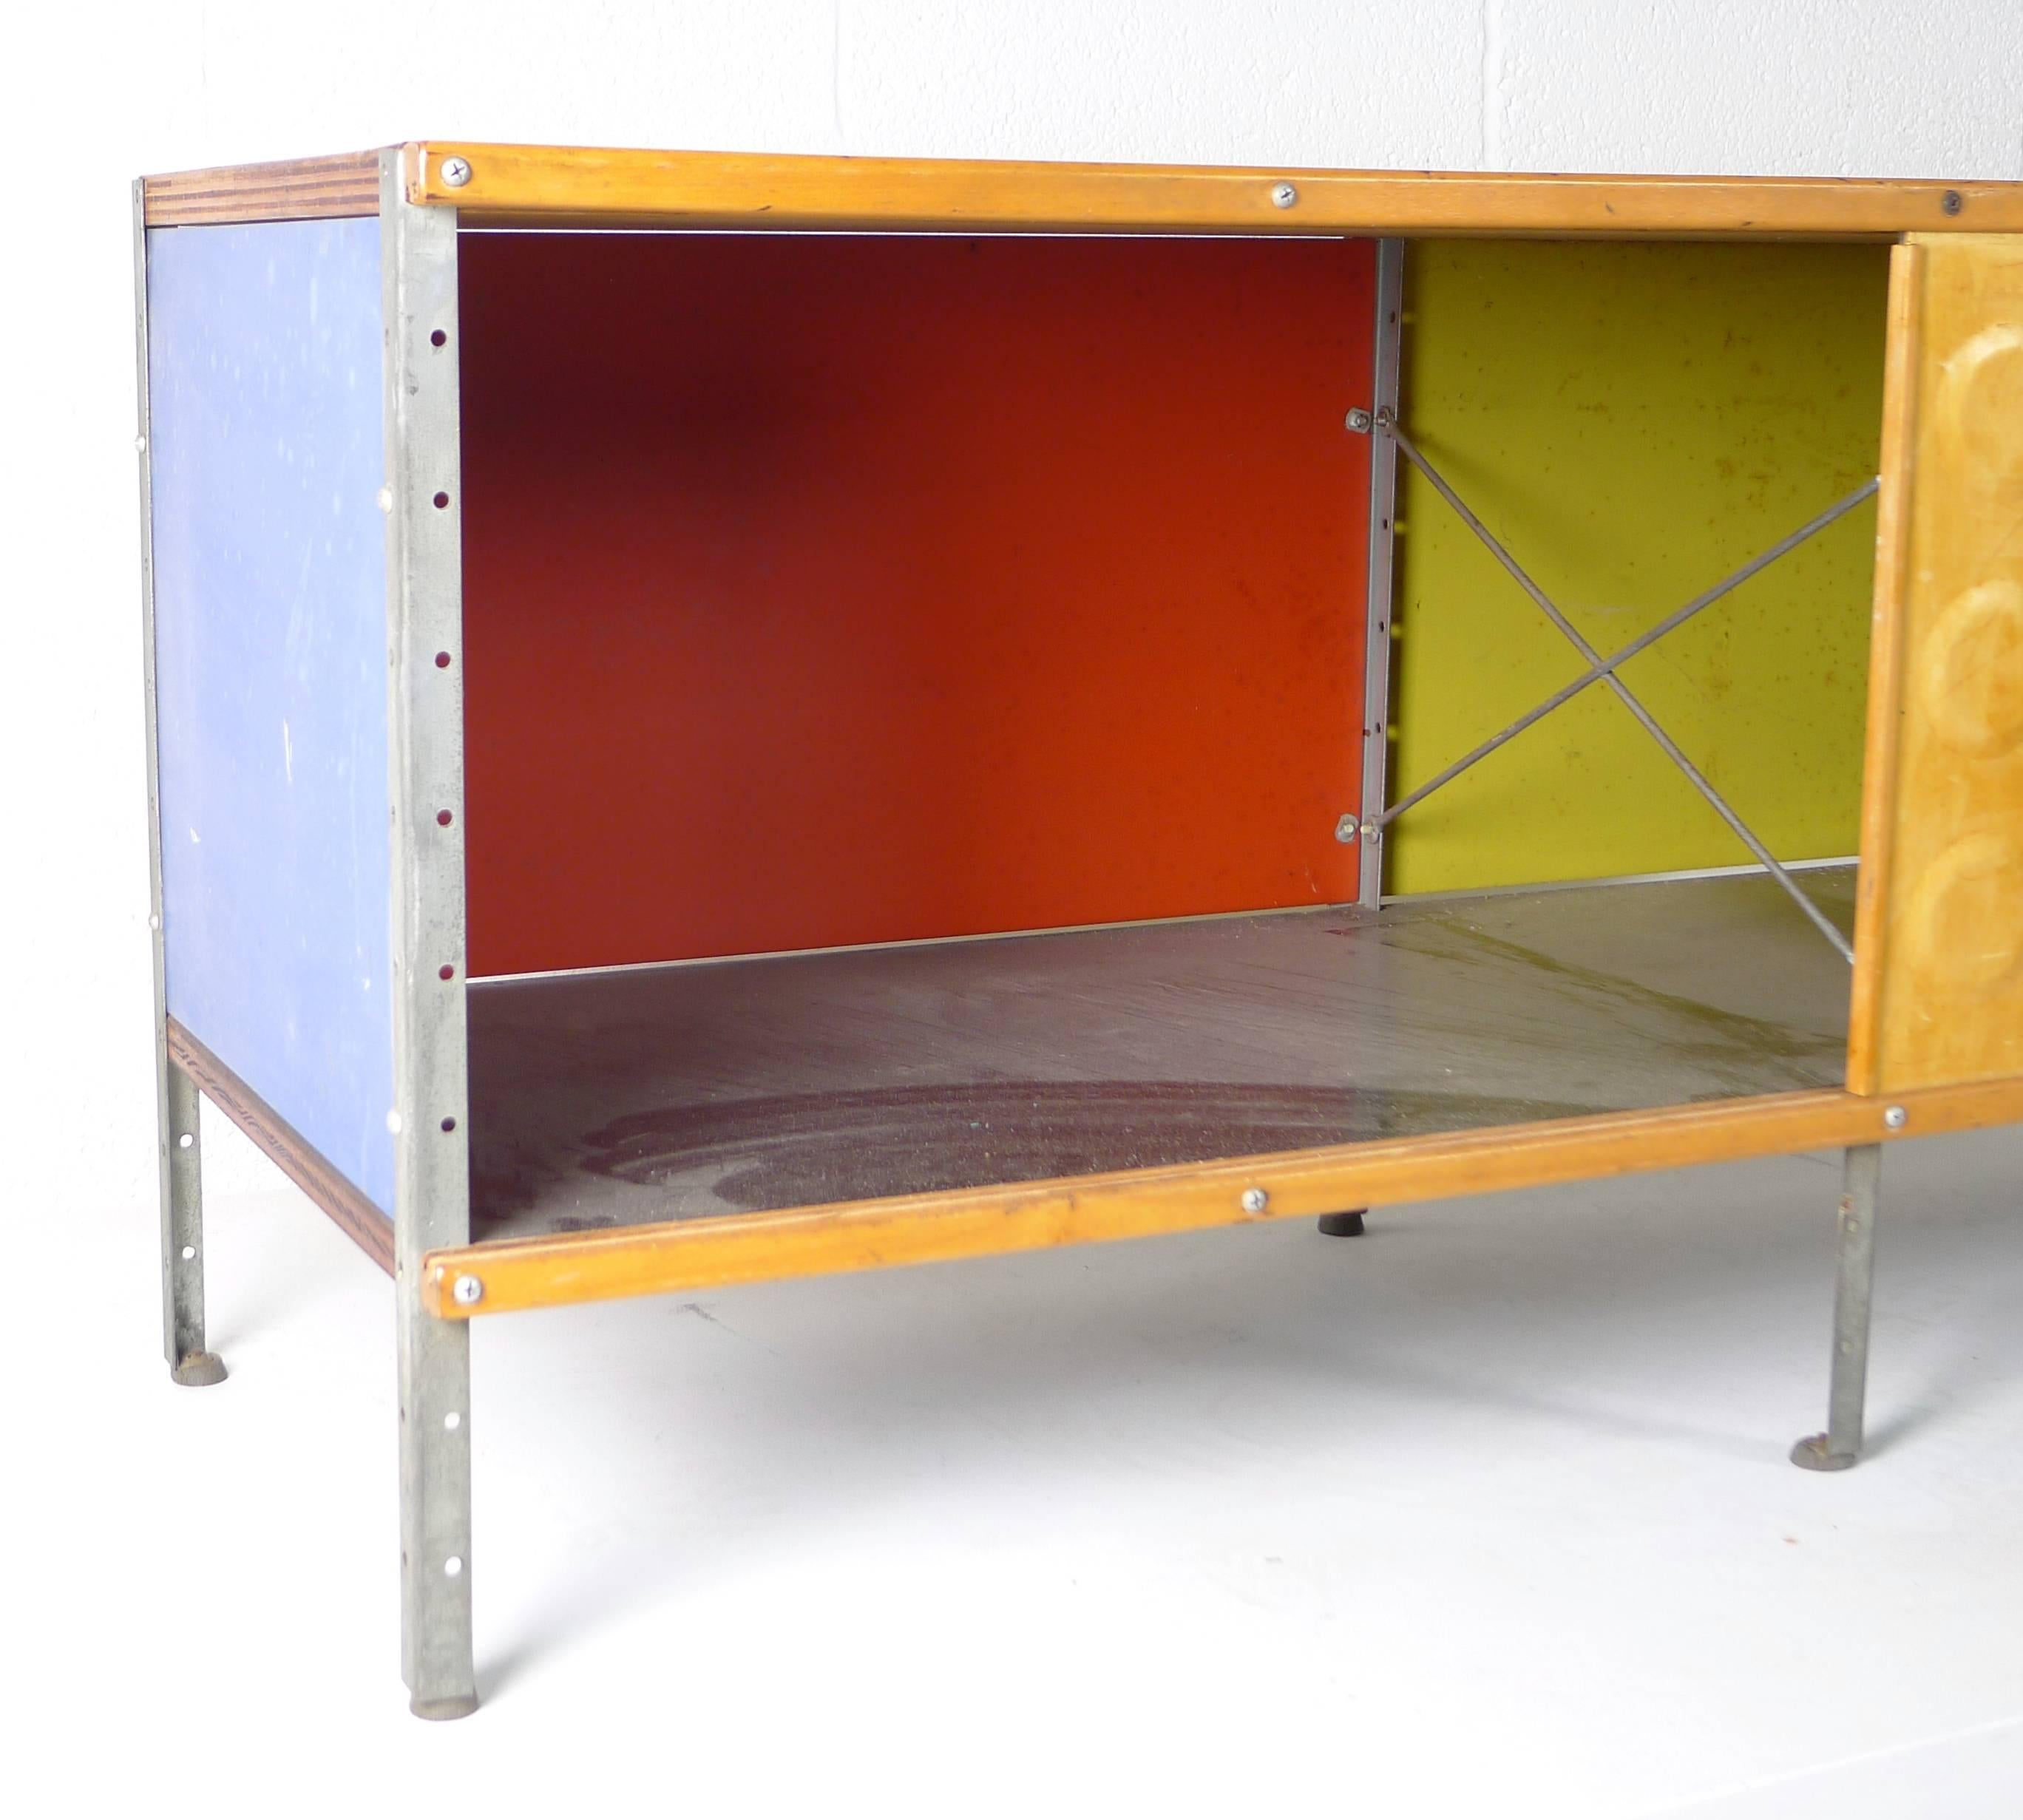 Charles and Ray Eames for Herman Miller, USA, circa 1950. A first series ESU 110-c. Zinc plated framework and Masonite panels with plywood top.
Dimple doors look to be old but may not be original to the piece.
Fine vintage condition, doors slide